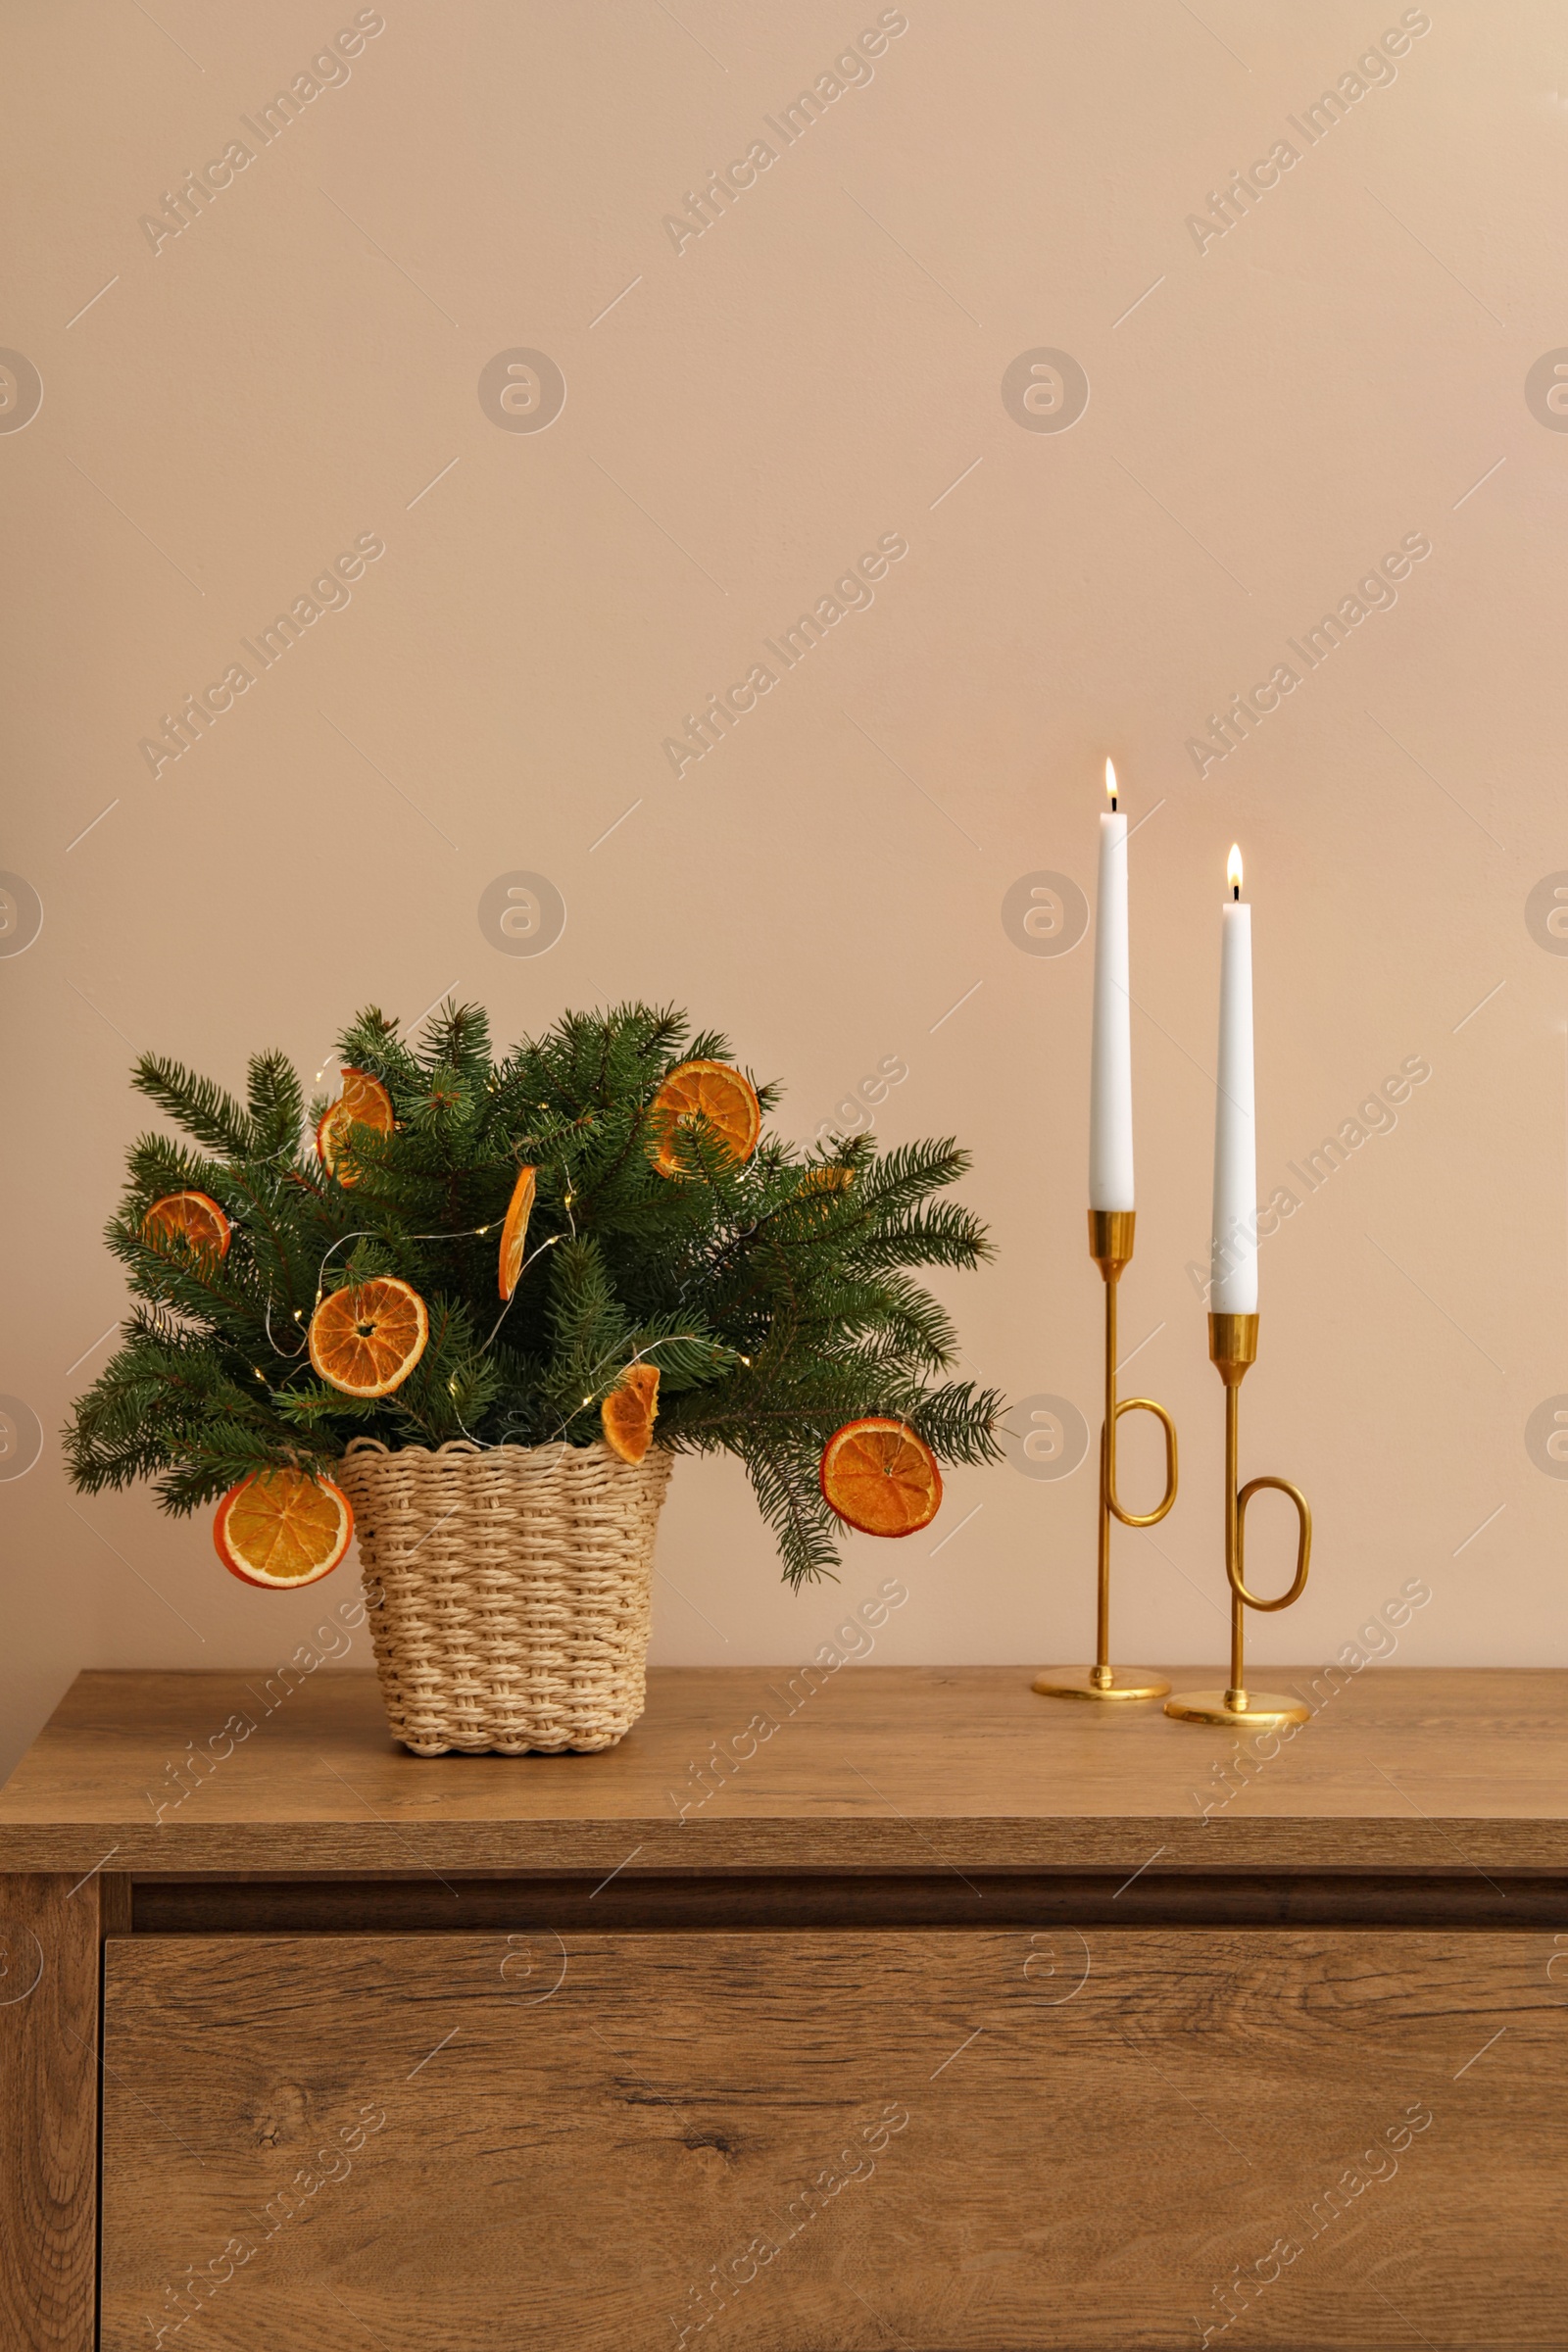 Photo of Wicker basket with fir tree branches and dried orange slices on wooden table near beige wall. Decor for stylish interior